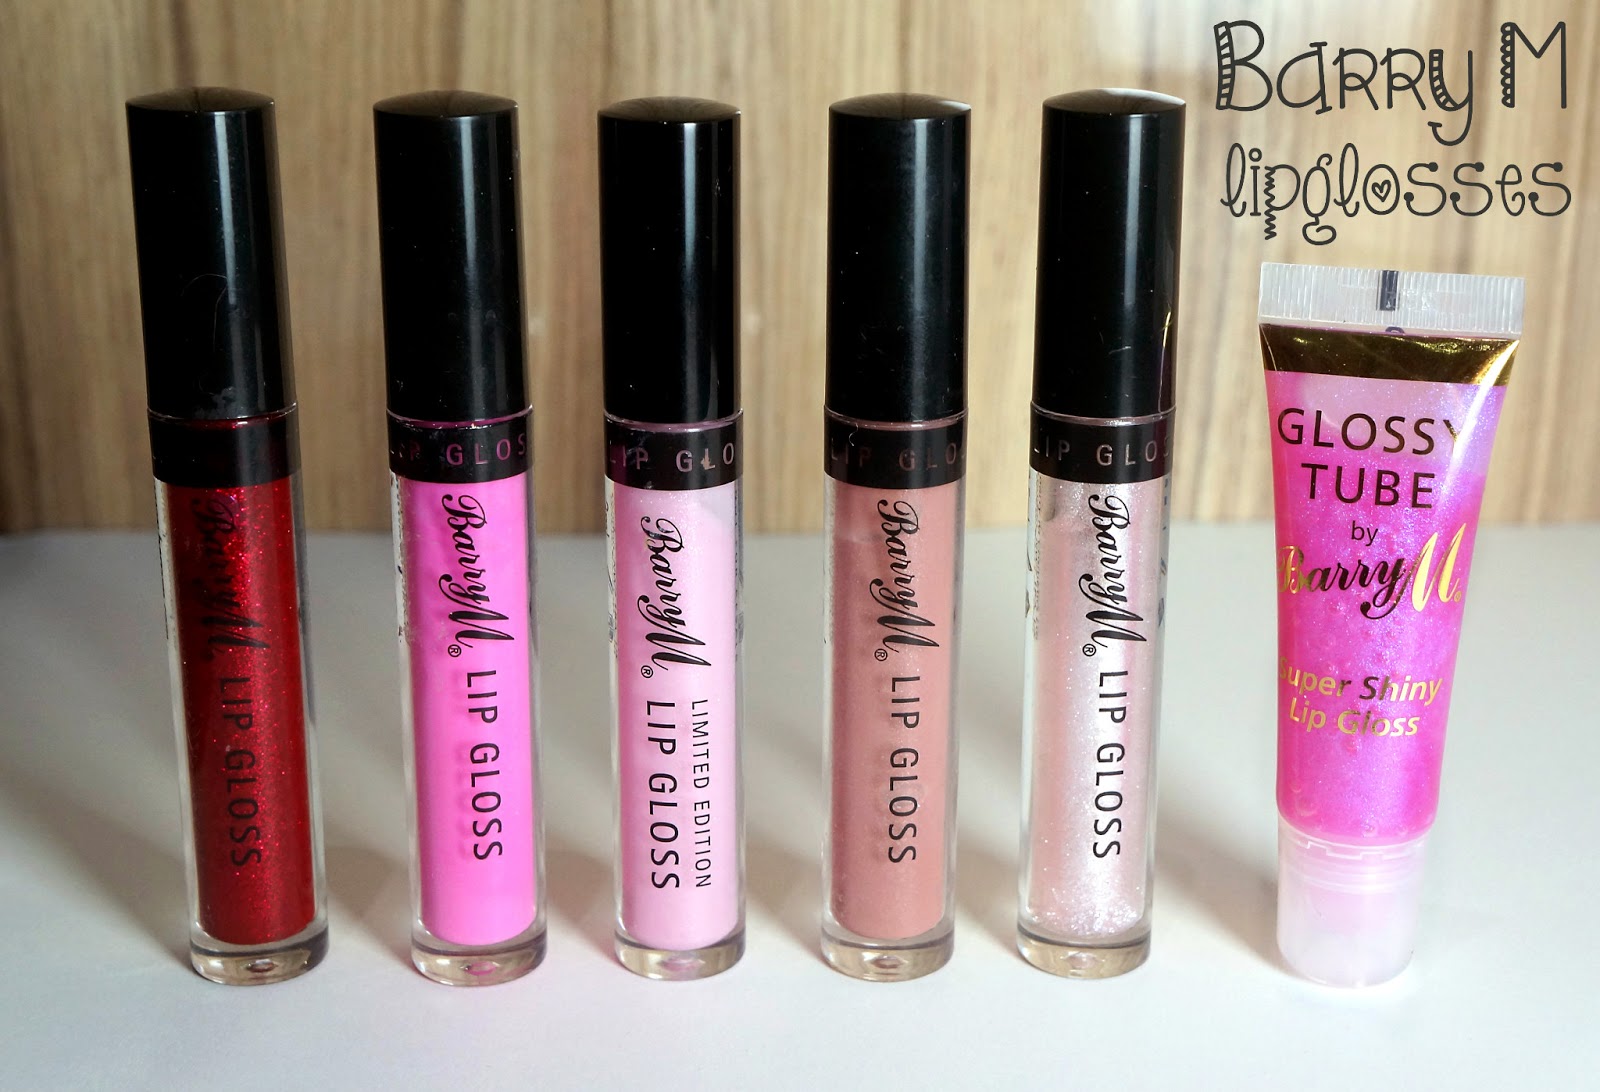 Birds Words Beauty Fashion Lifestyle Barry M Lipgloss Collection